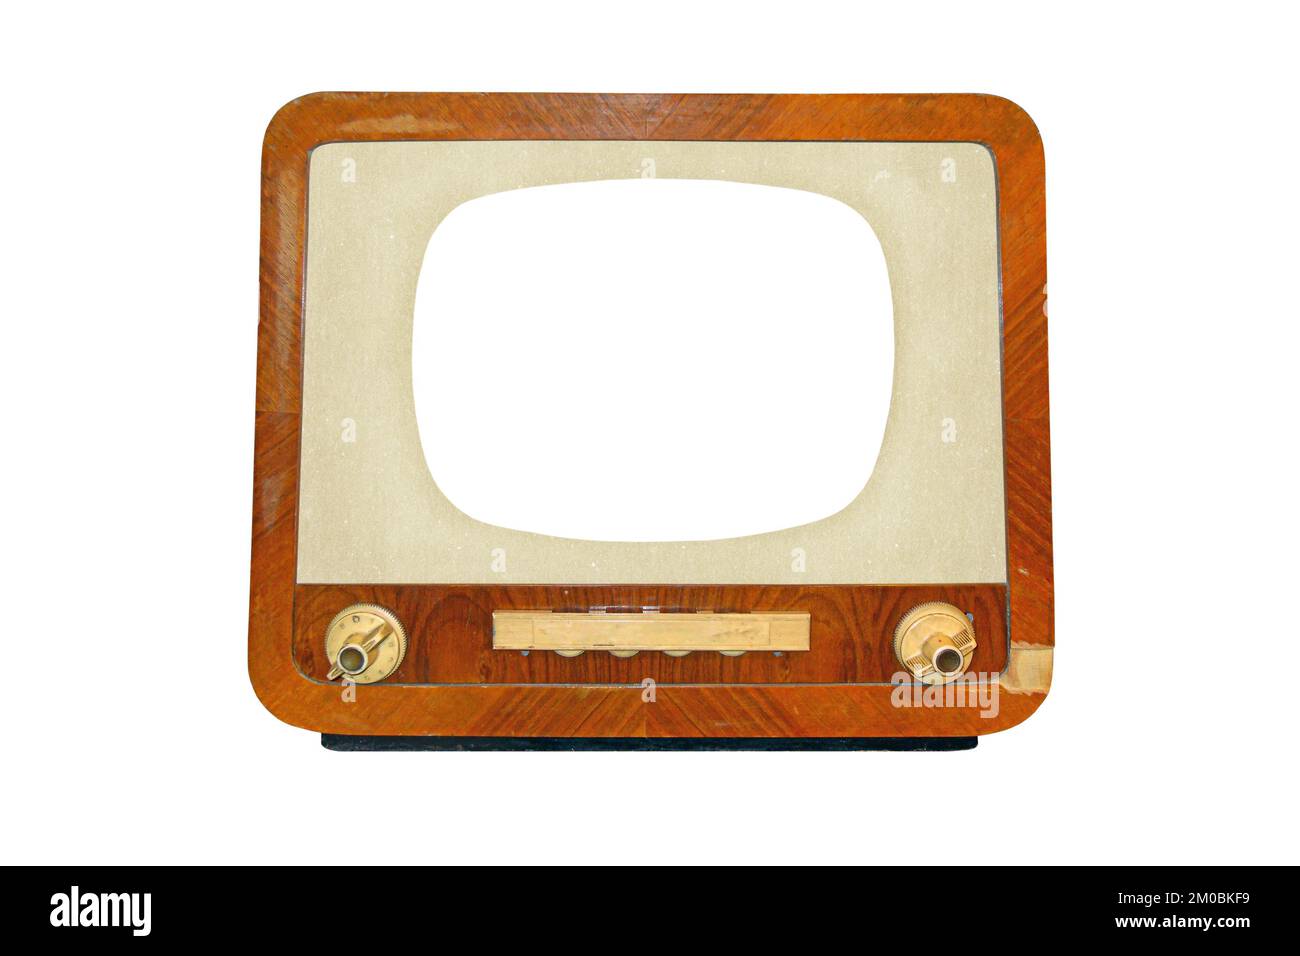 Old retro CRT television receiver with blank screen isolated on white background, vintage analog TV technology Stock Photo